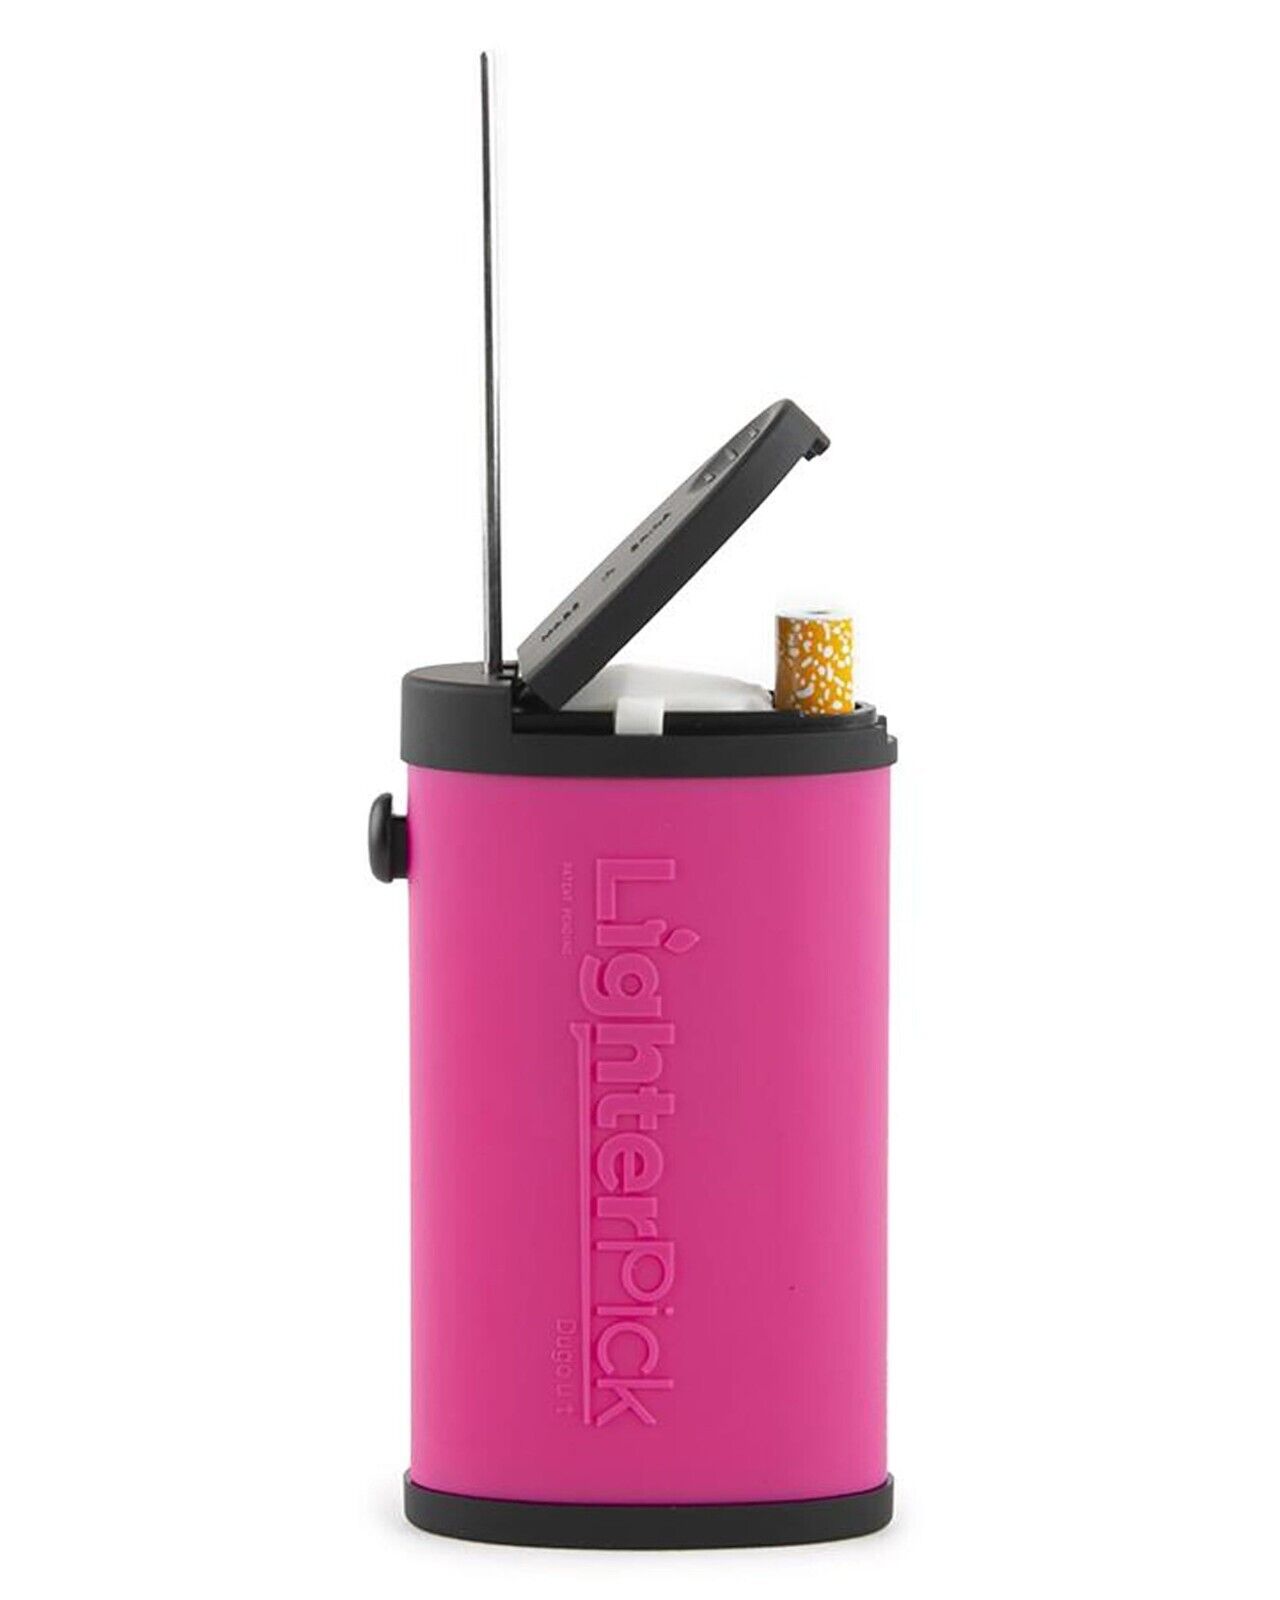 LighterPick All-in-One Waterproof Smoking Dugout Scent Resistant Color Pink